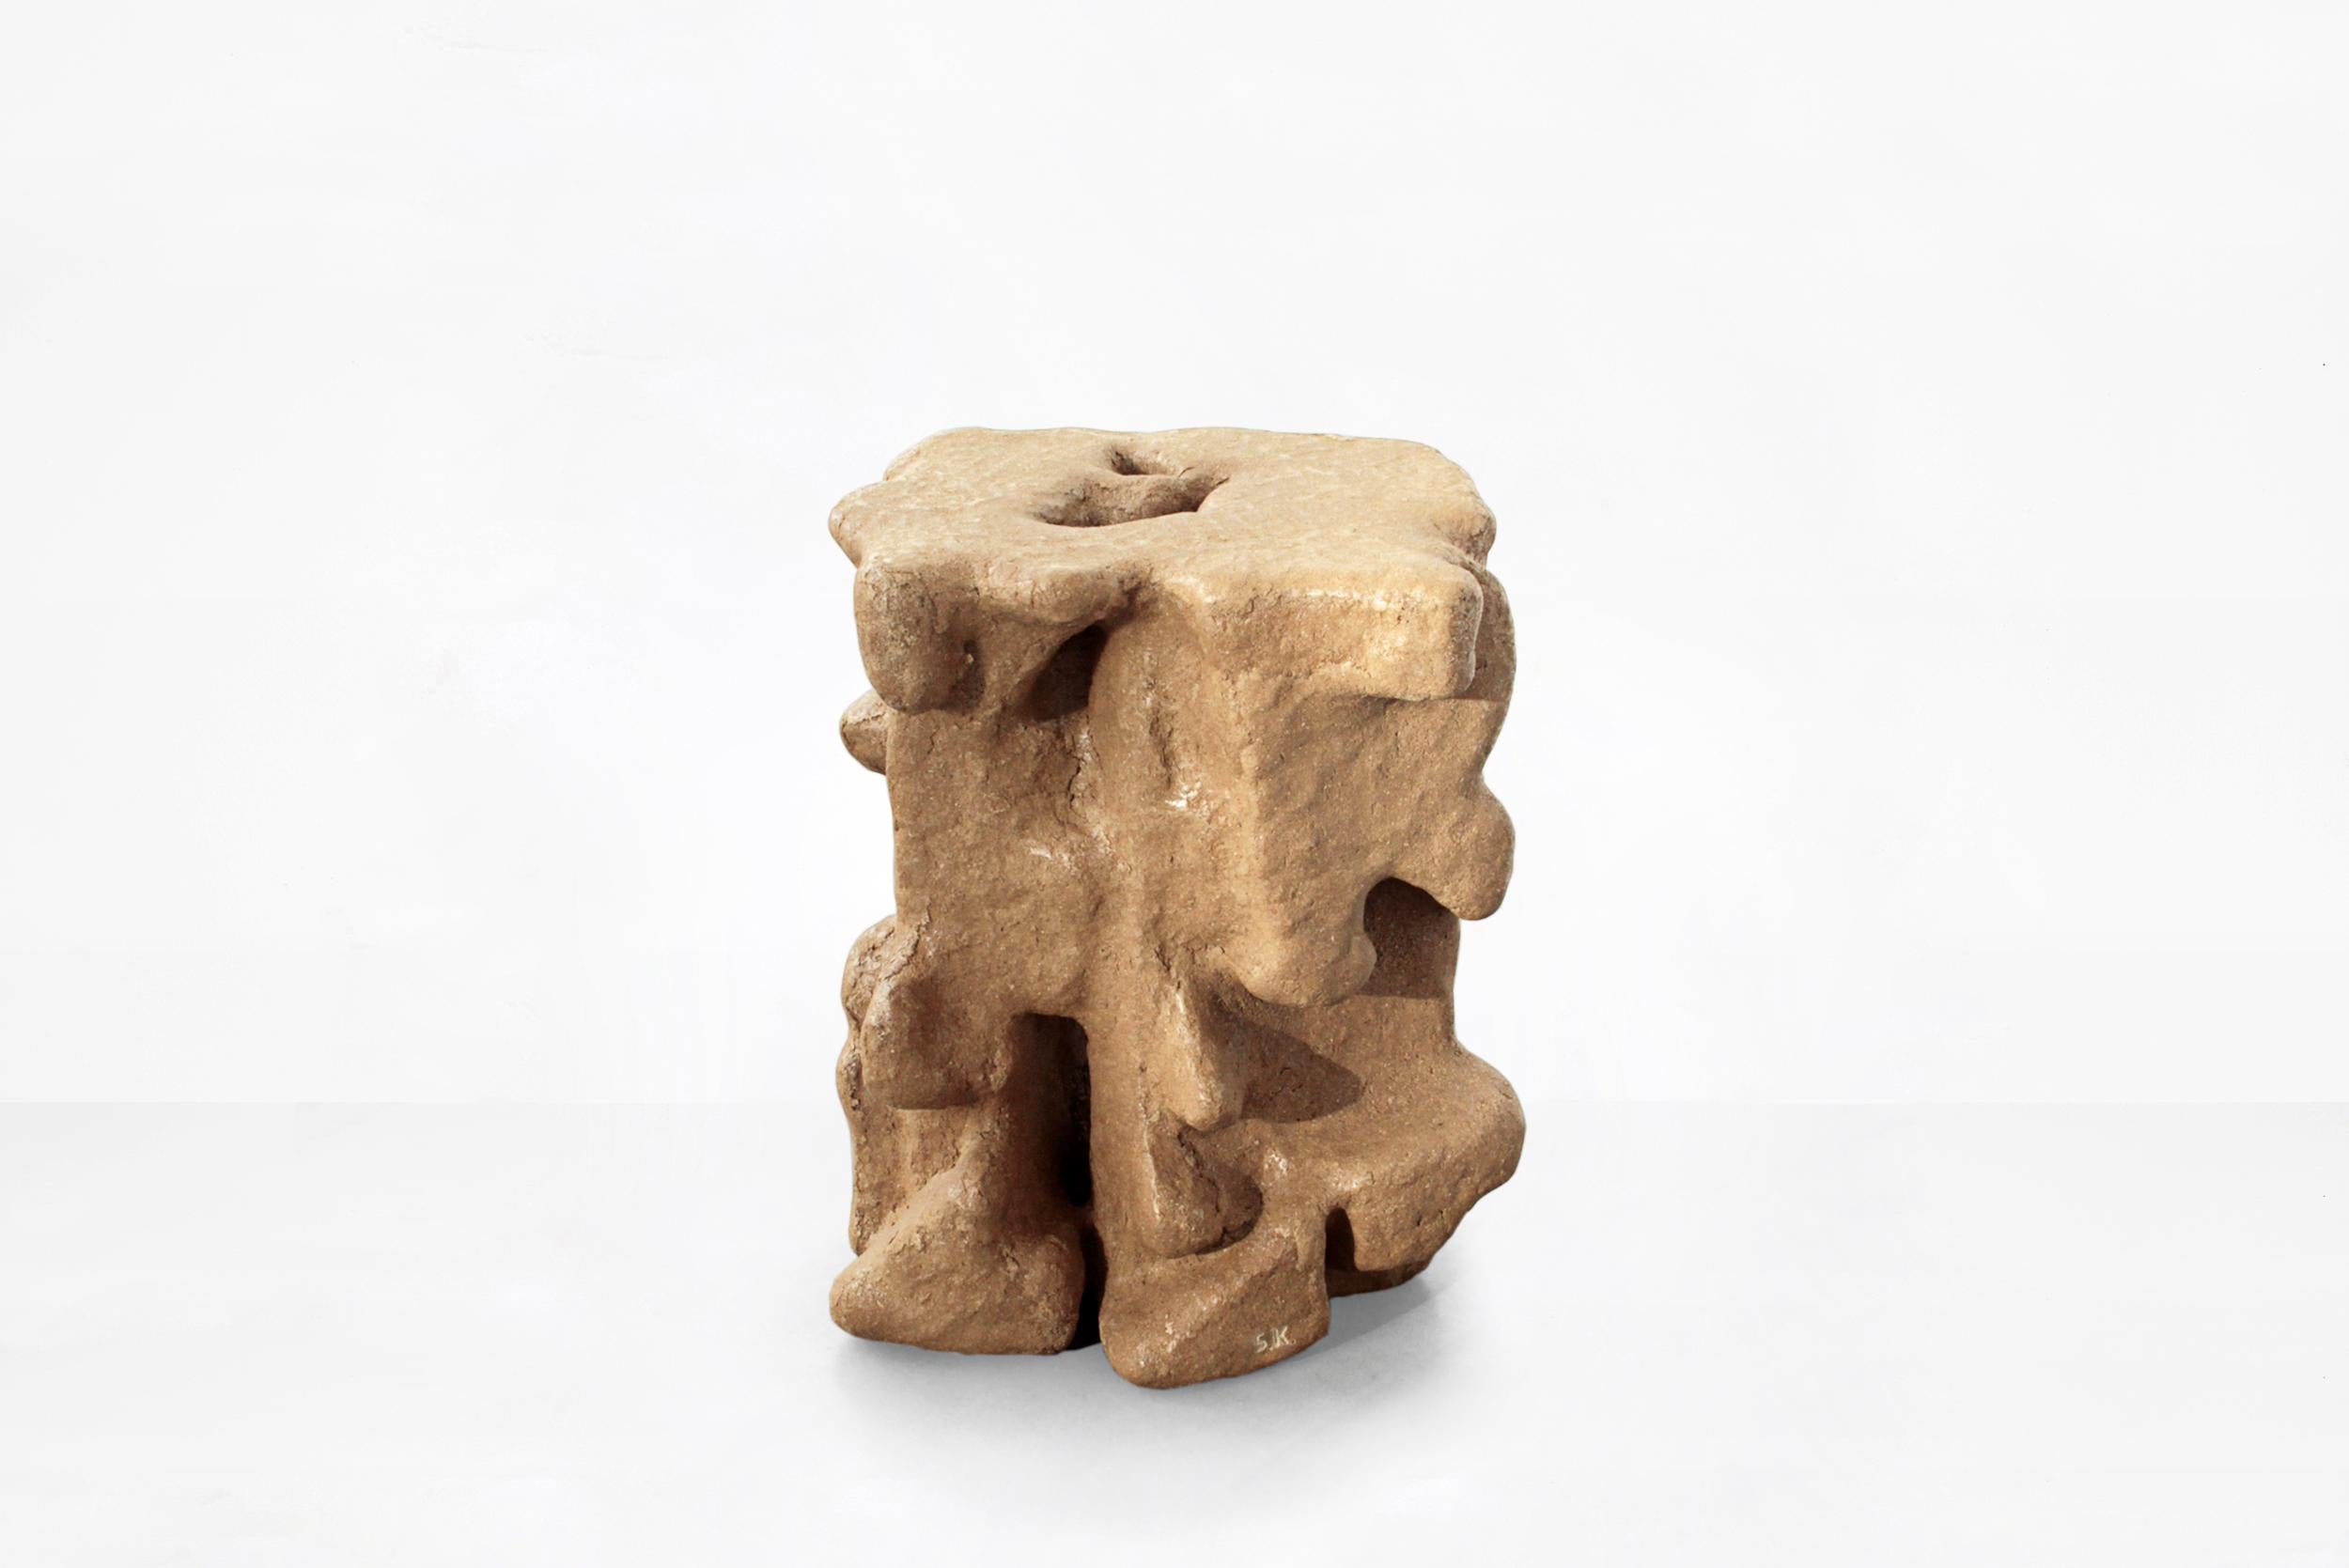 Sigve Knutson
Wood clay side table
Manufactured by Sigve Knutson
Oslo, Norway, 2019
Wood, PVA-glue, wood dust, polystyrene
Produced for Side Gallery, Barcelona 

Measurements
44 cm x 32 cm x 53 H cm
17.32 in x 12.59 in x 20.86 H